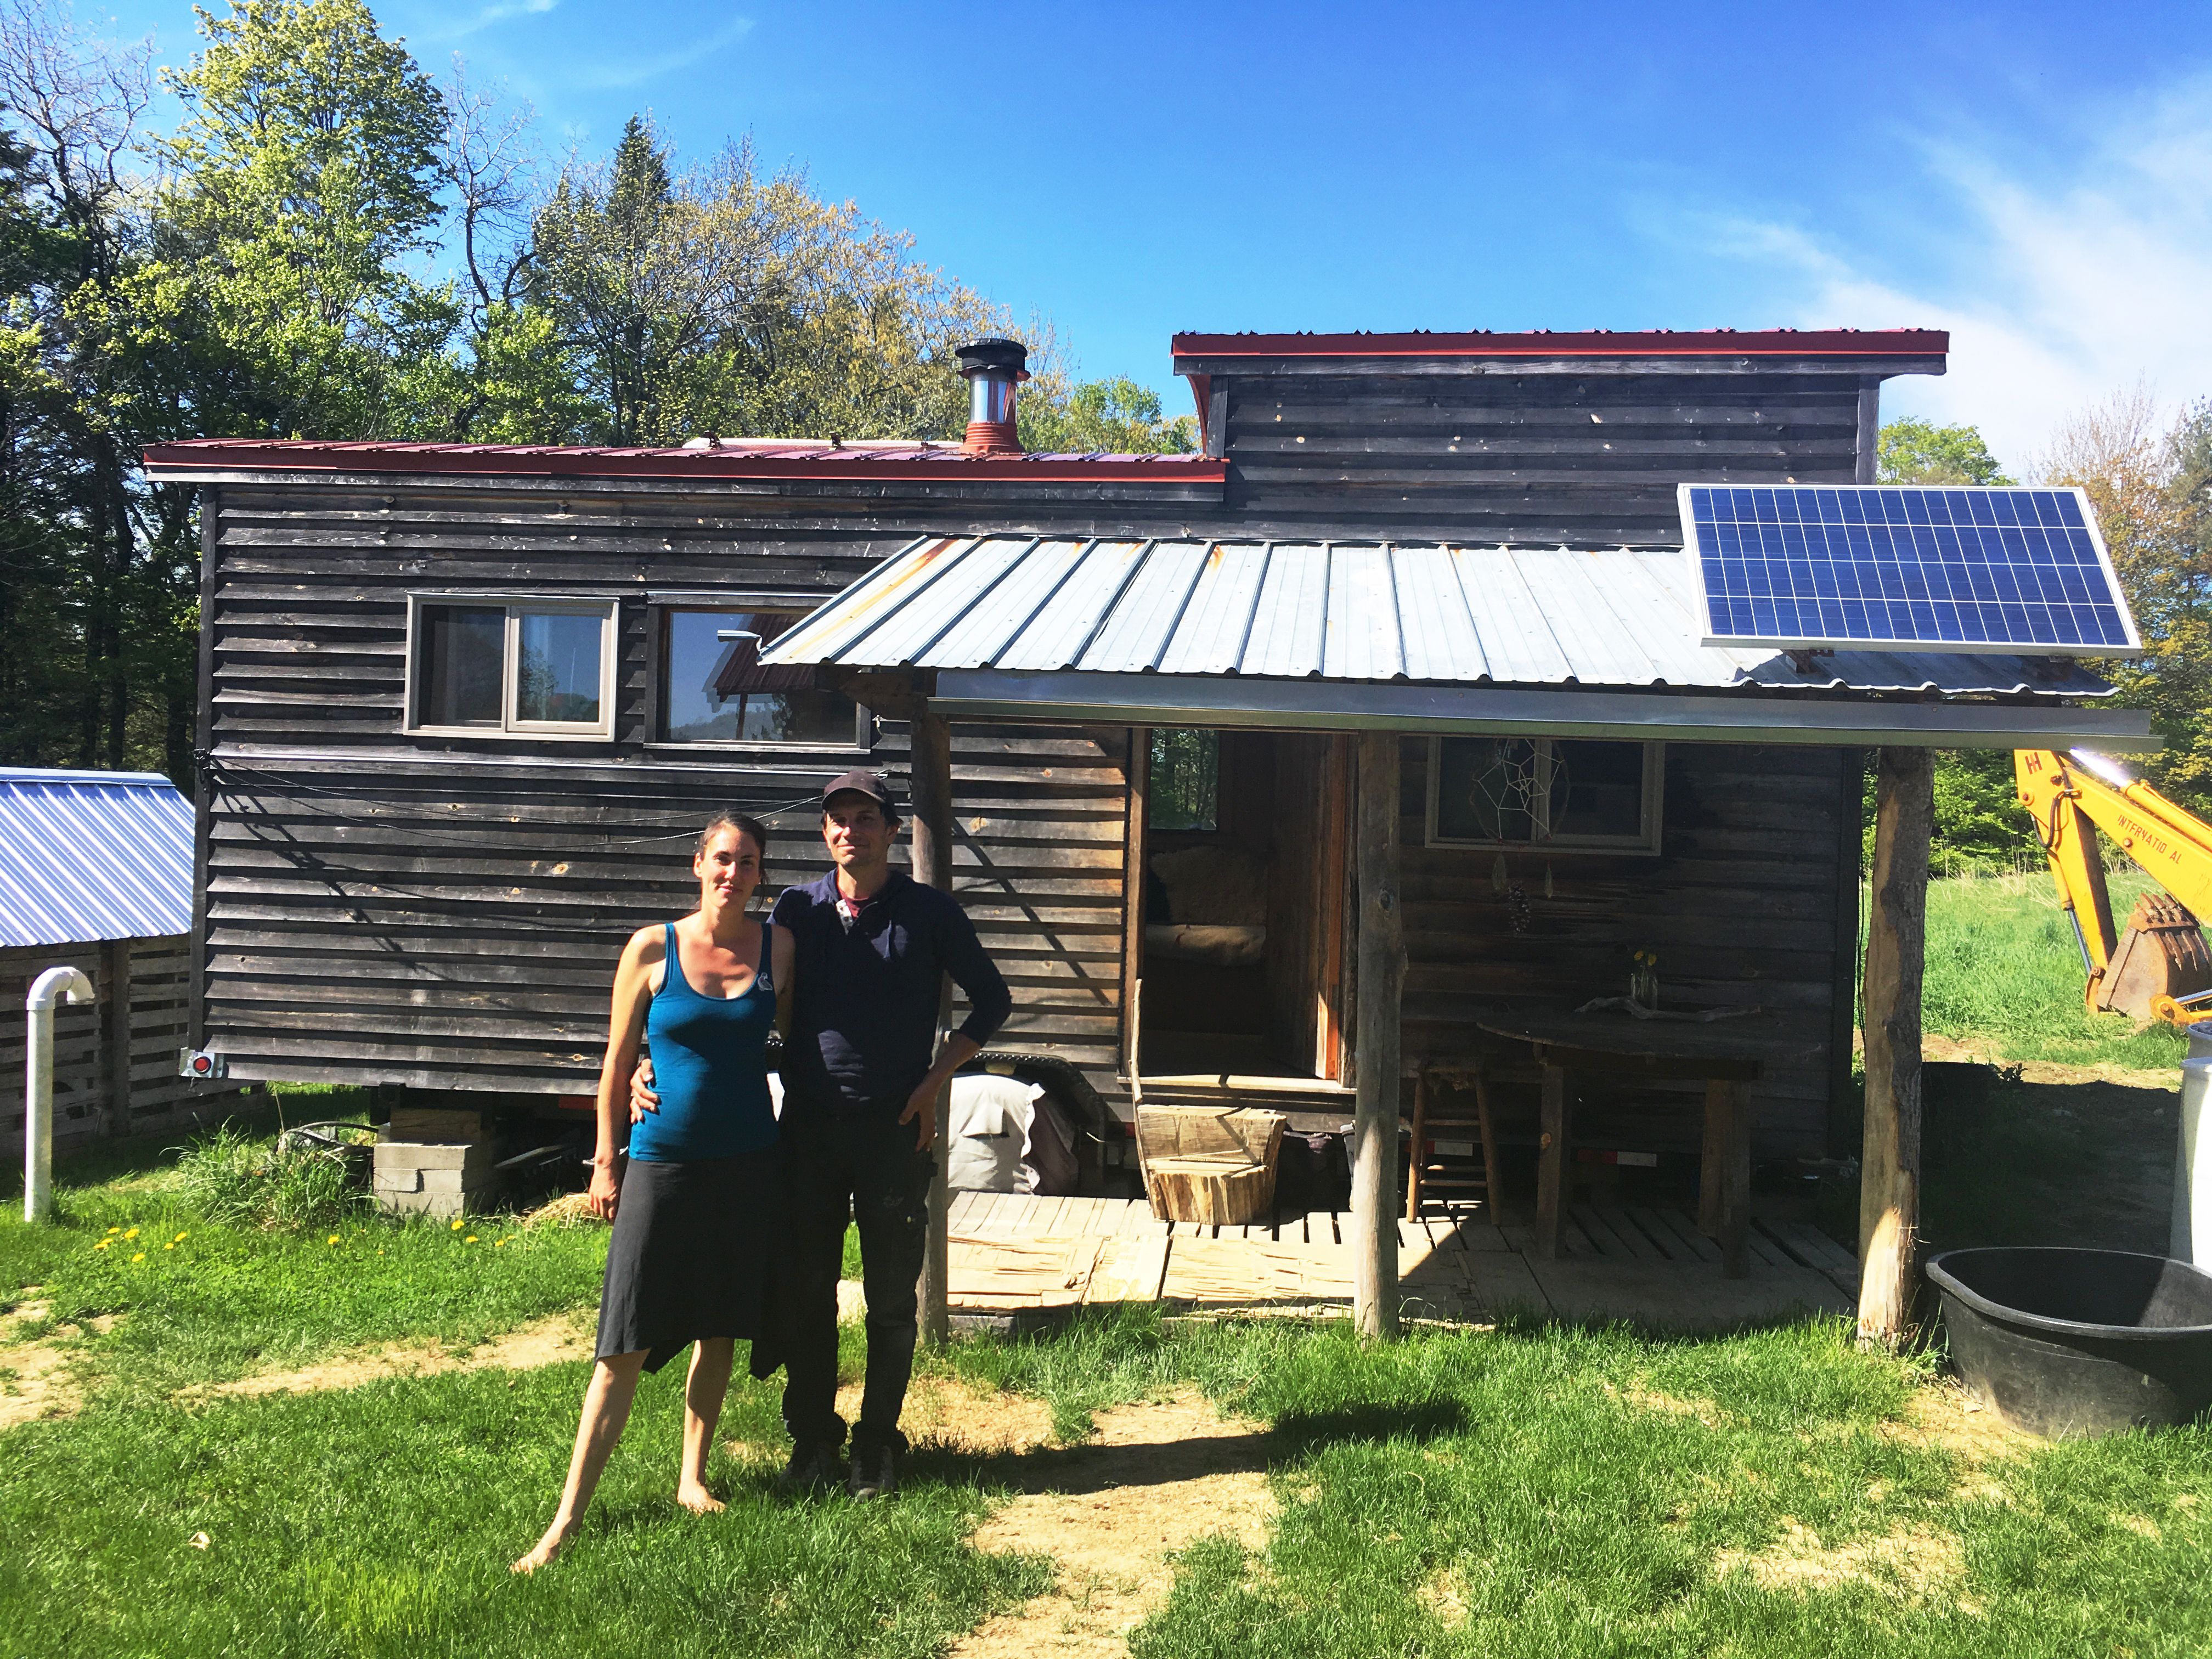 Downsize Me: Tiny houses celebrated in Vermont while barriers remain in Massachusetts